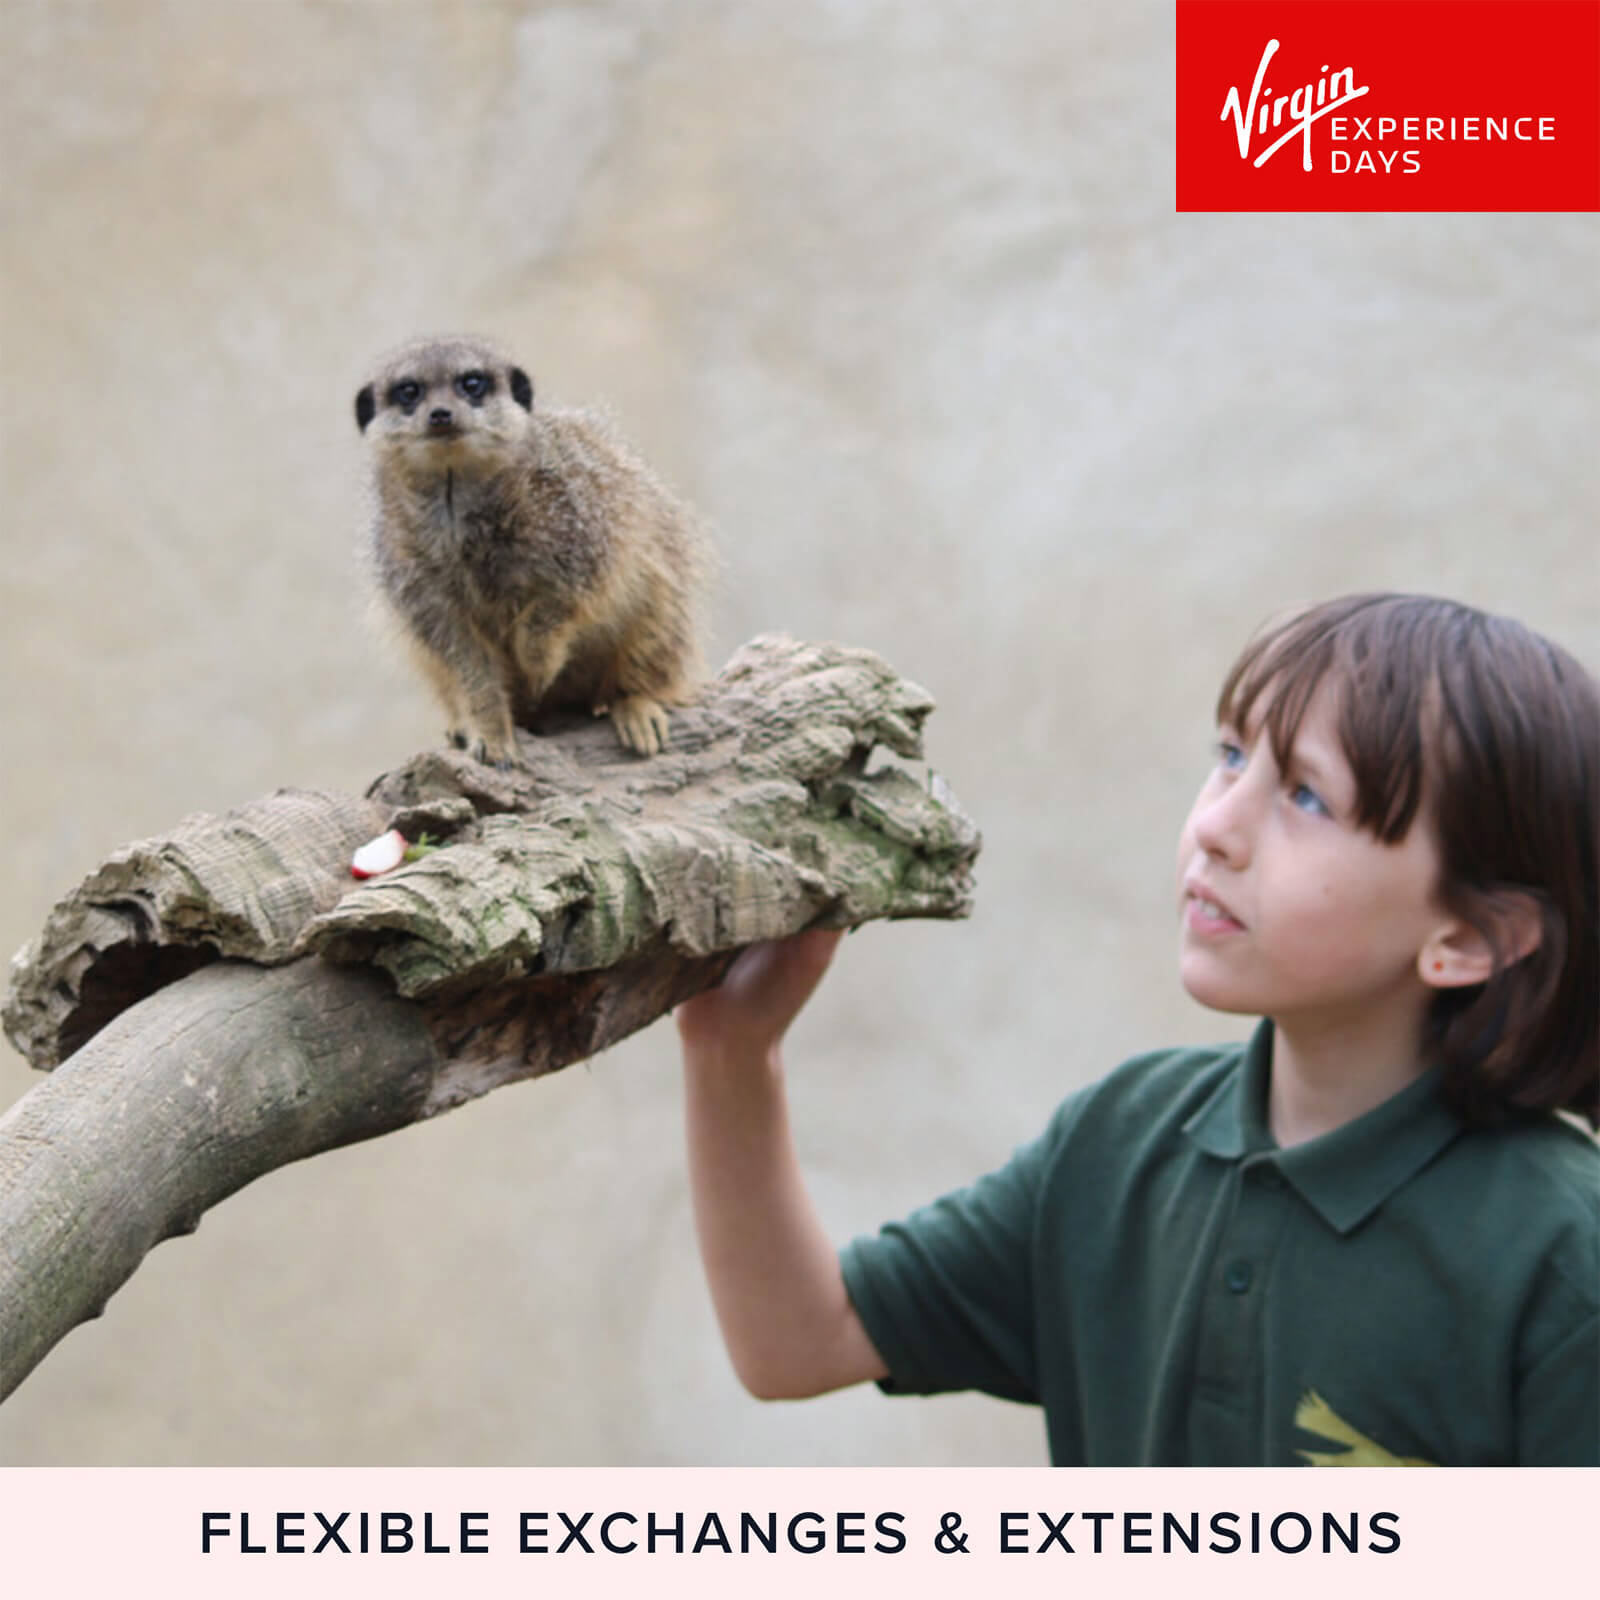 Meet And Feed The Meerkats At Millets Falconry Centre